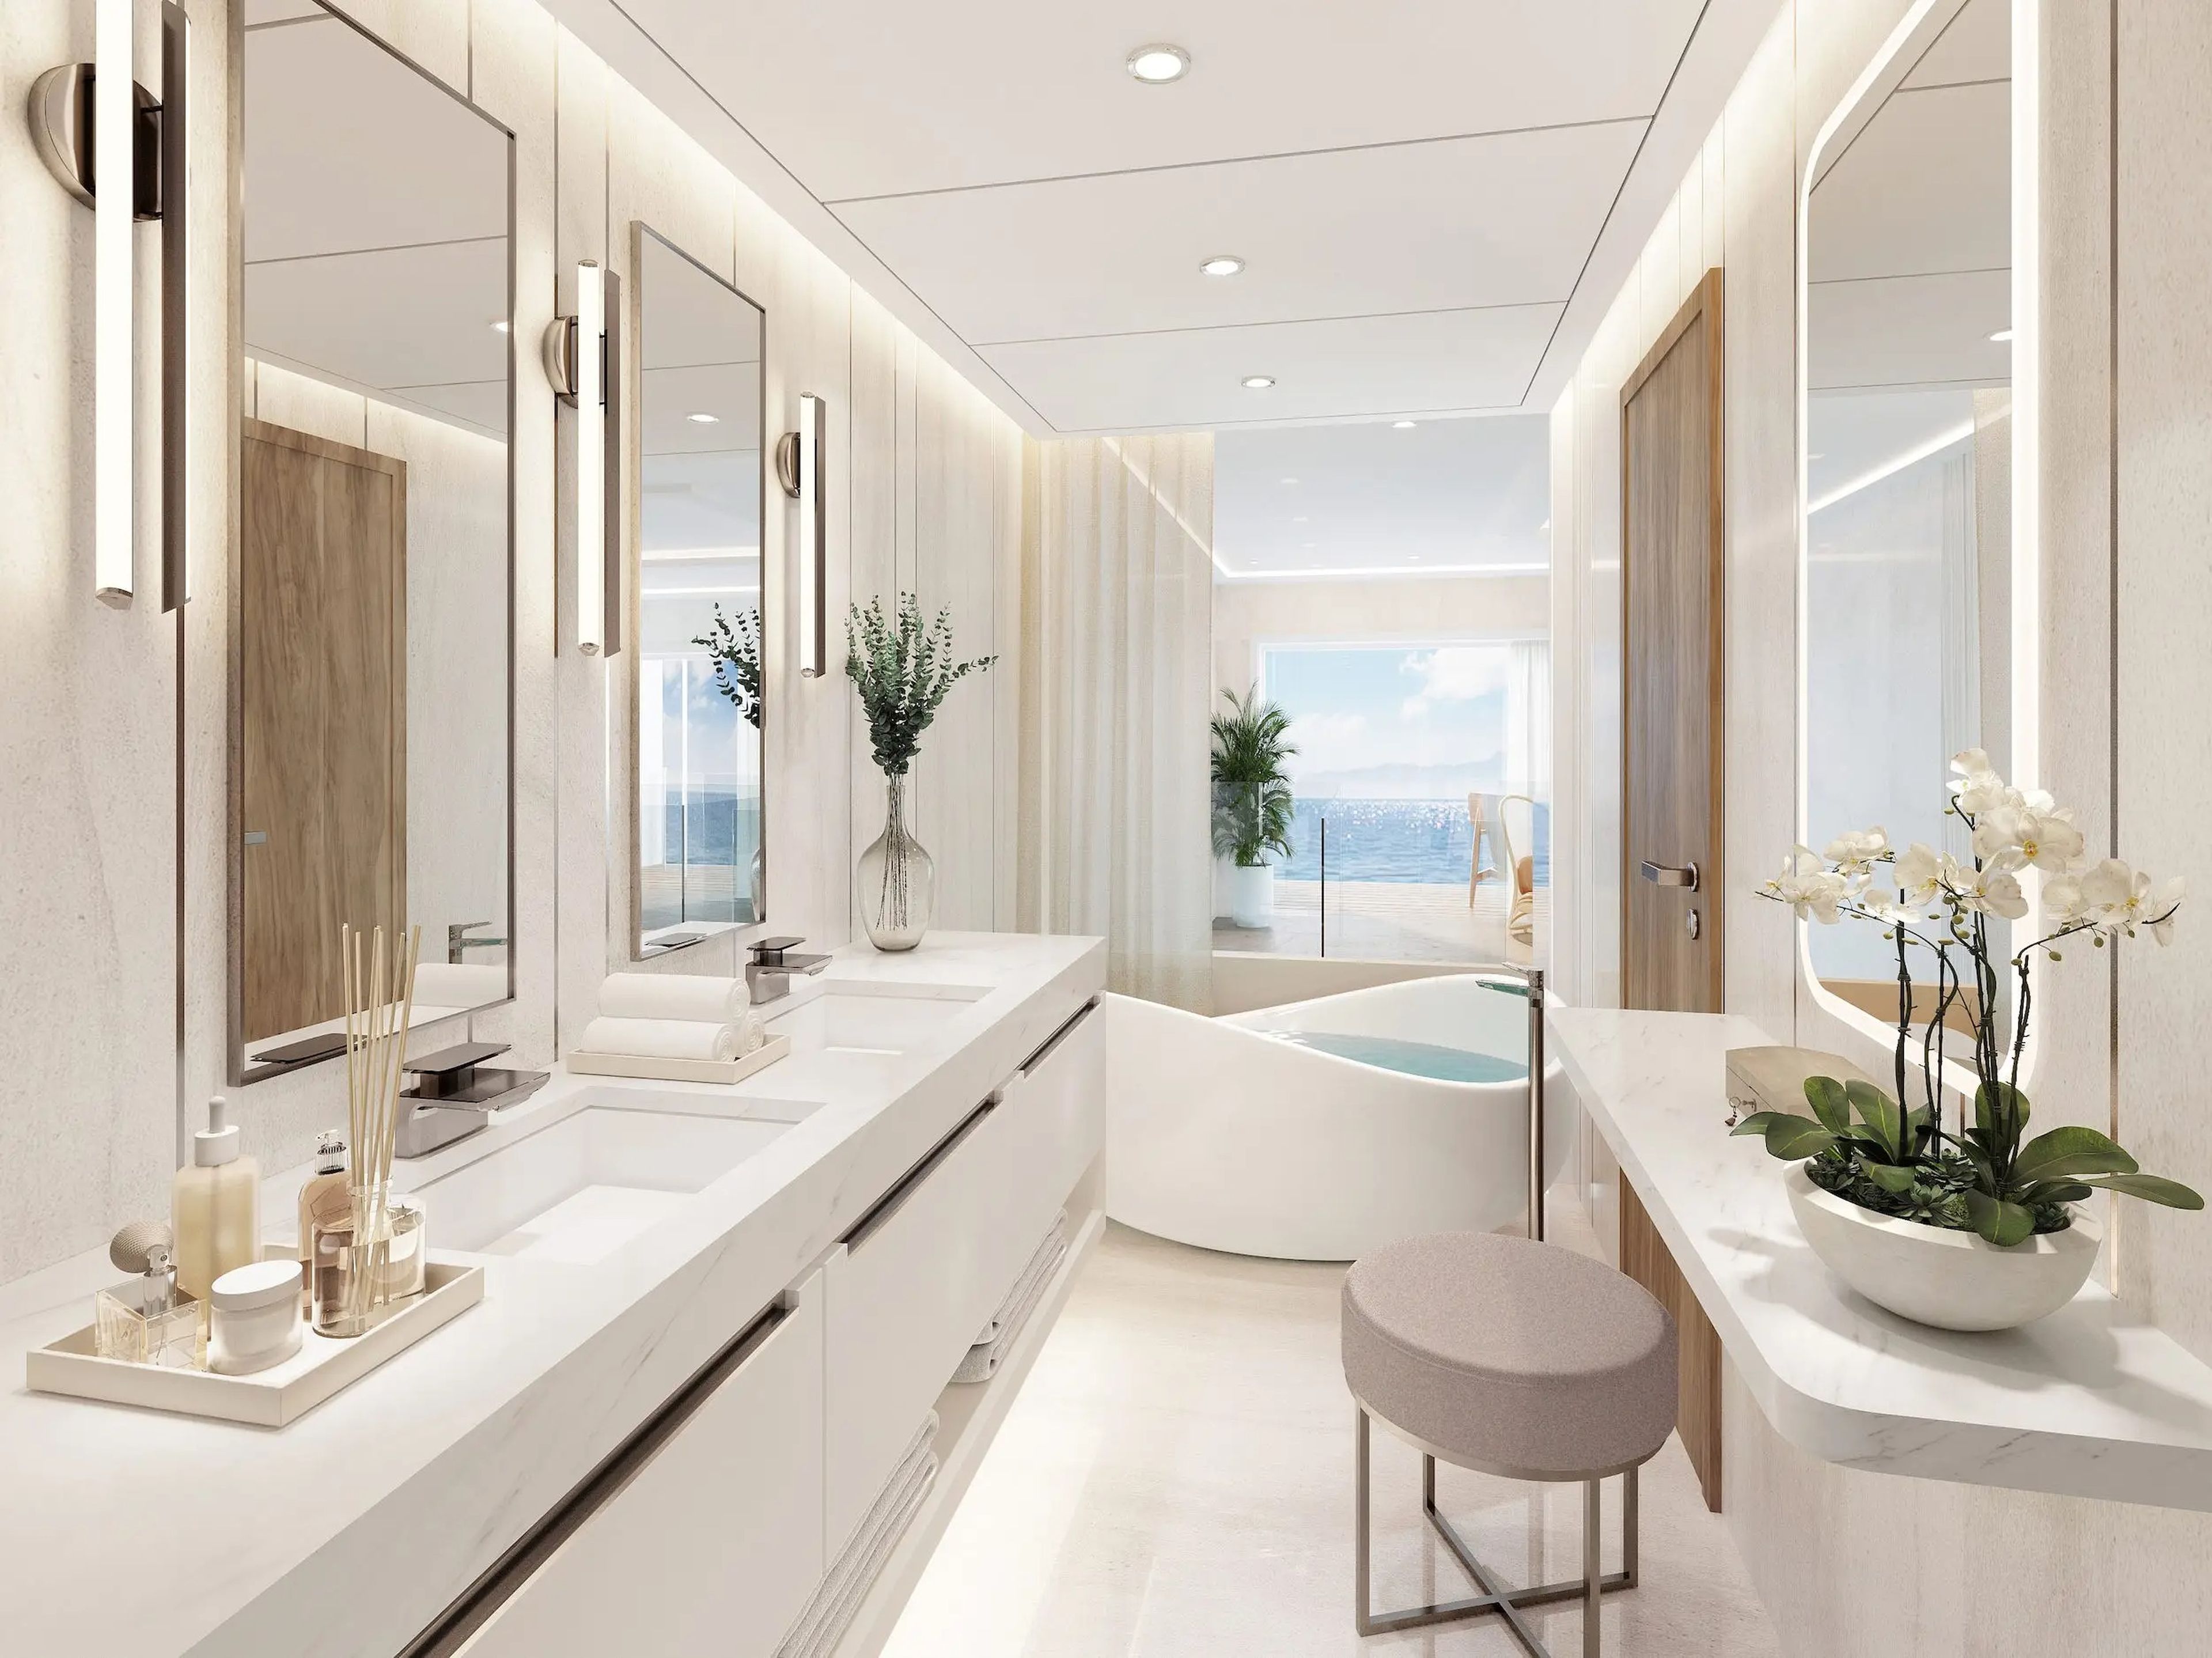 A rendering of the bathroom in Storylines' MV Narrative cruise ship.